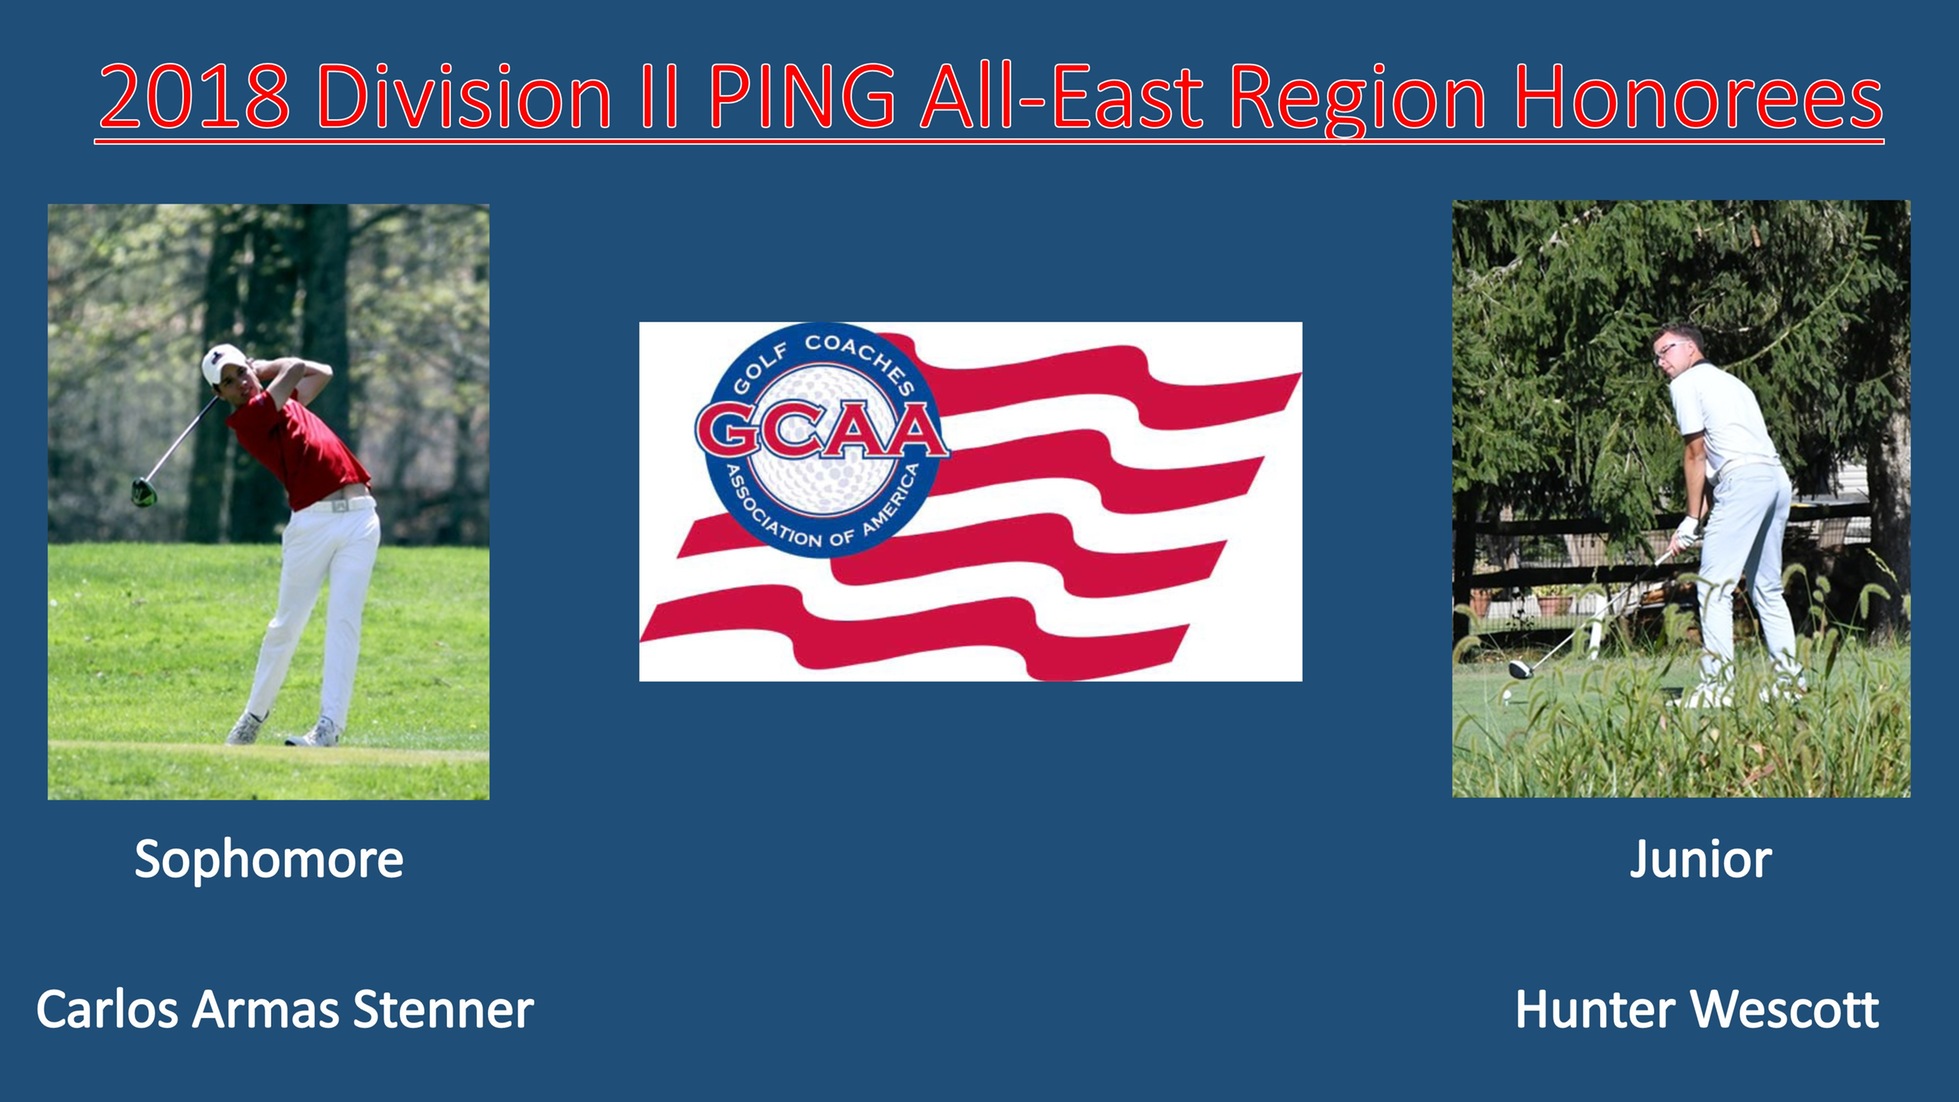 Dominican College Golfers Carlos Armas Stenner and Hunter Wescott were named to the Division II PING All-East Region Team.